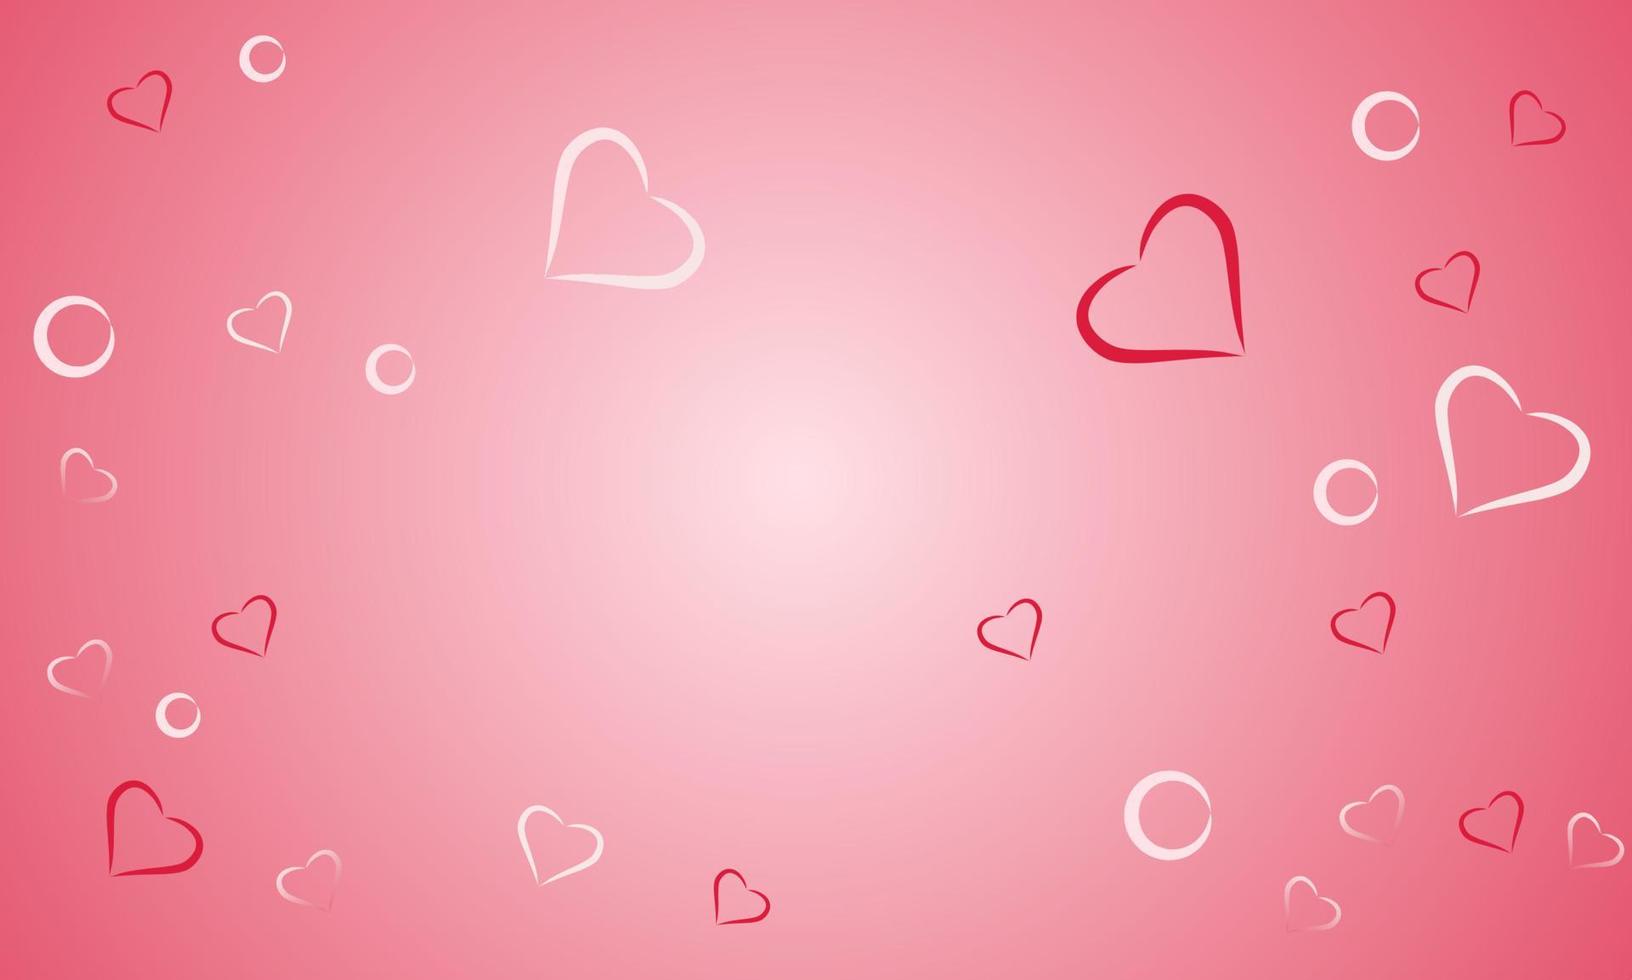 Valentine's Day background.happy valentine's day background design with romantic heart shape elements.for Greeting cards, banners, posters etc vector